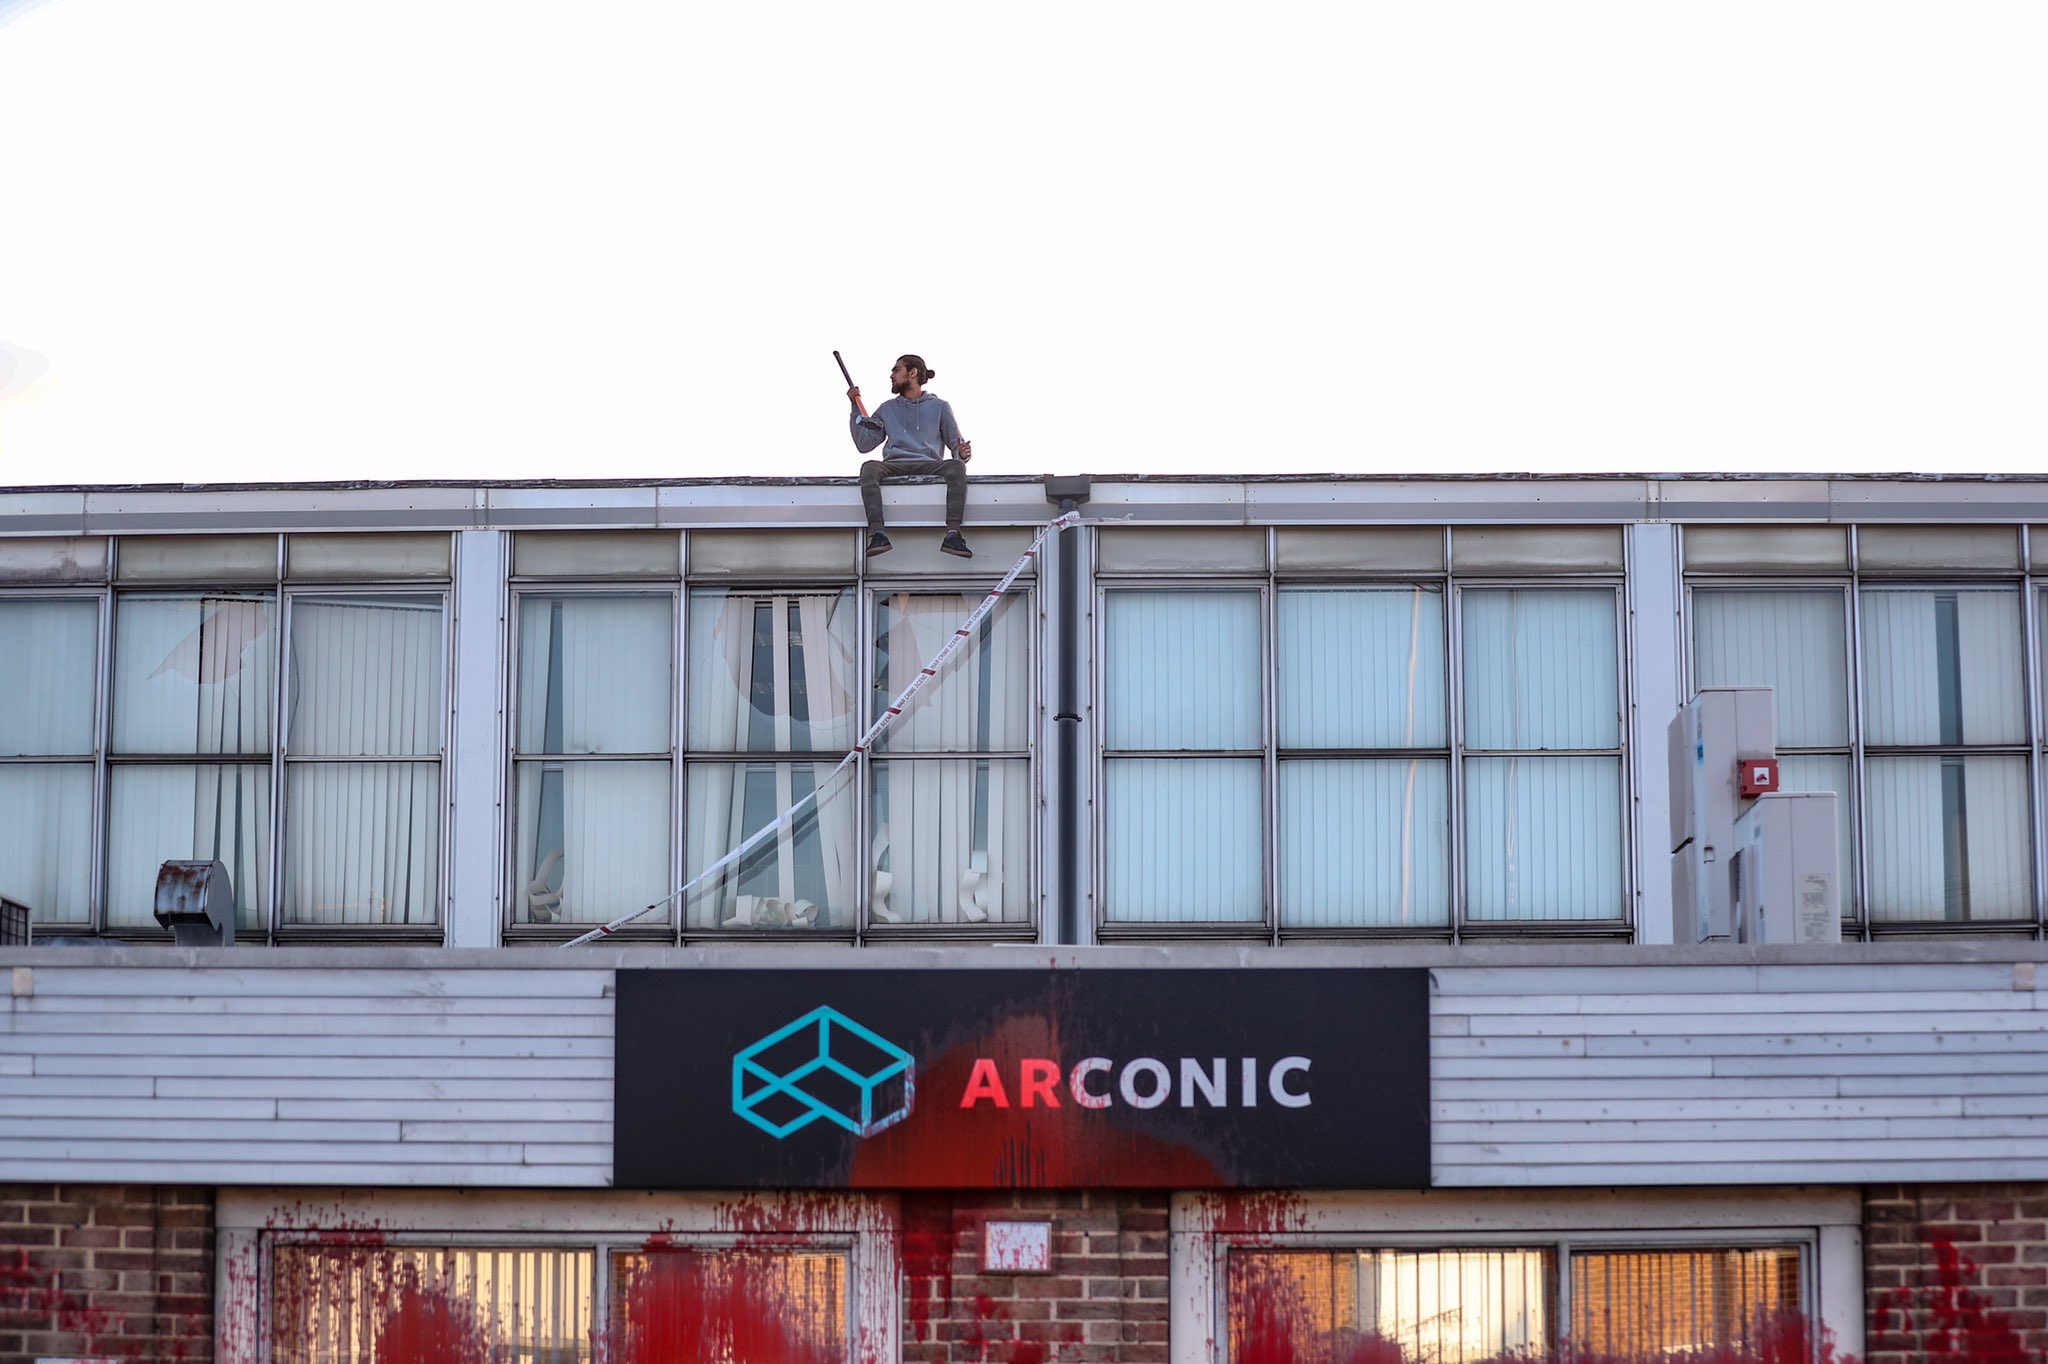 Activist on Trial for Shutting Down Arconic in Solidarity With Grenfell and Palestine